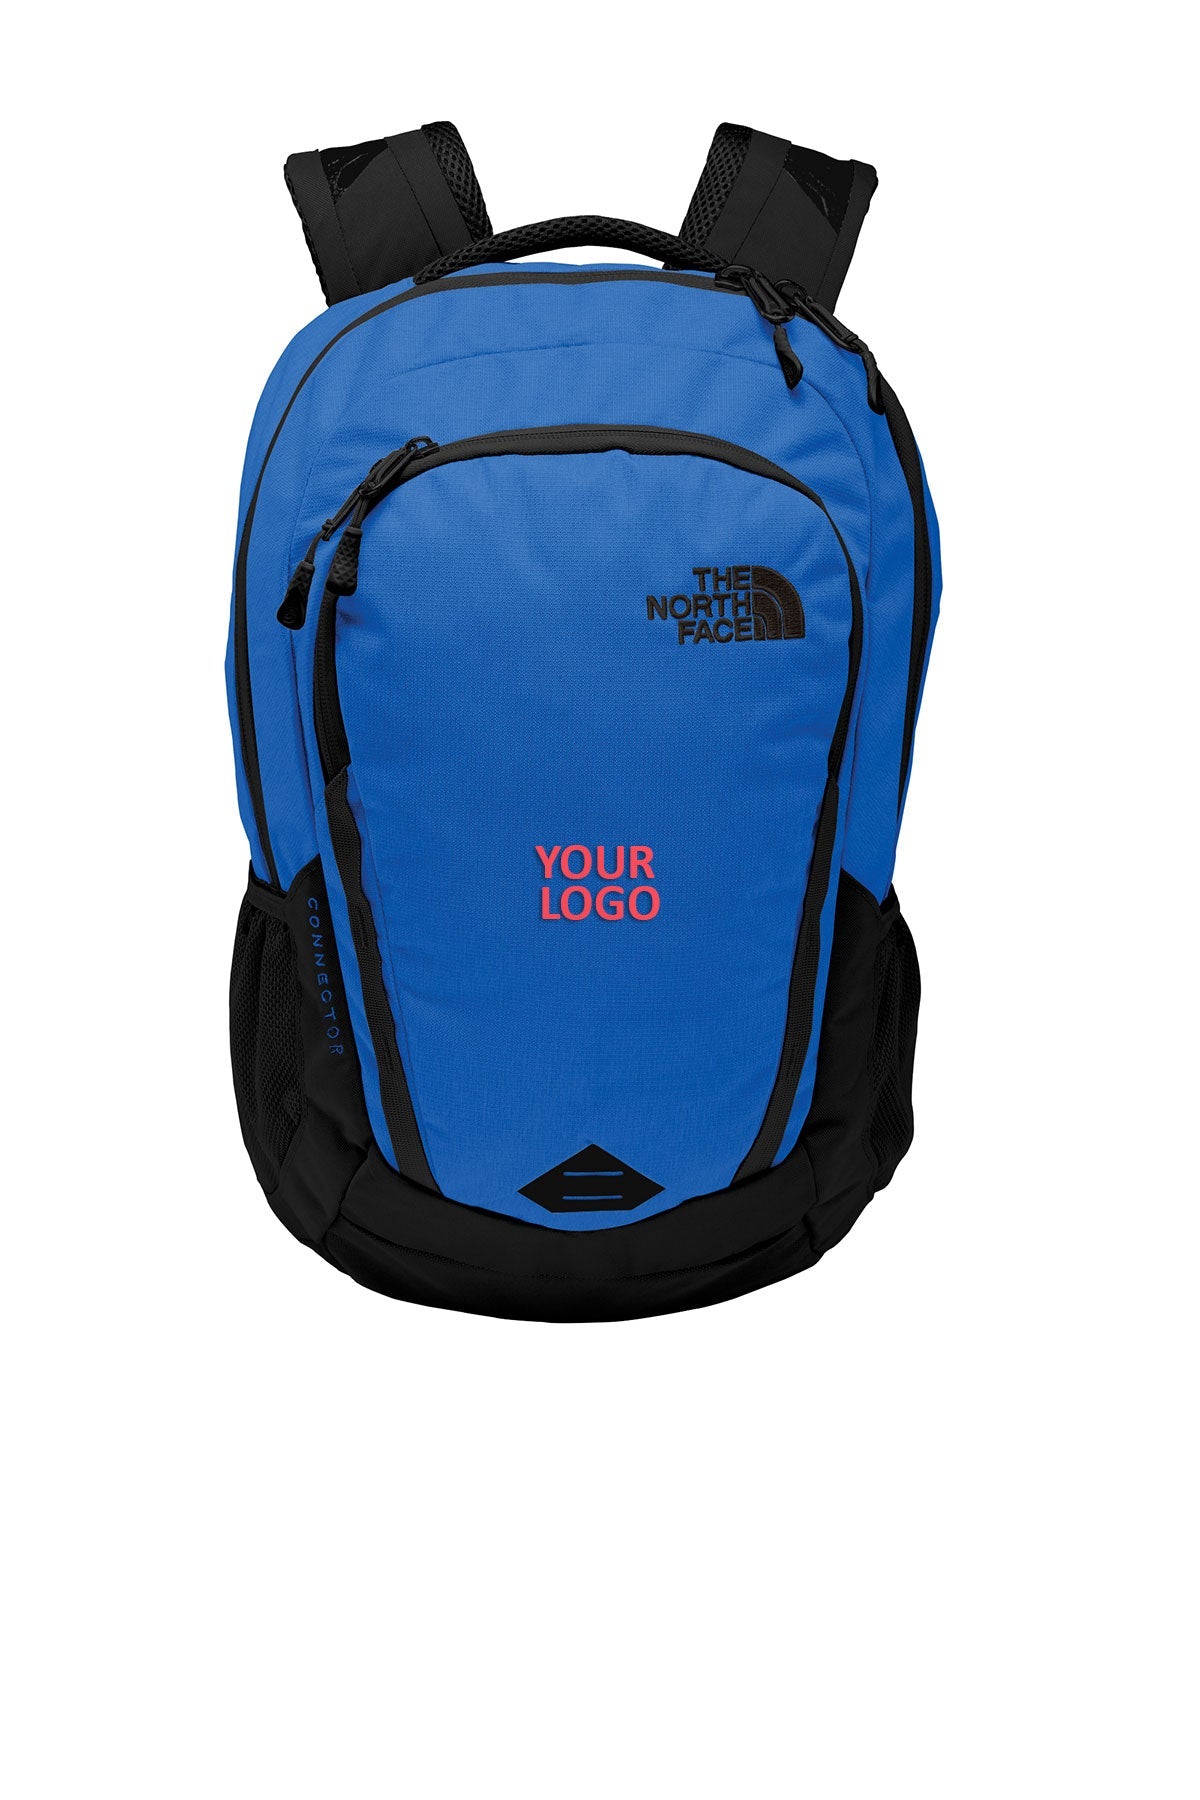 the north face connector backpack nf0a3kx8 monster blue tnf black